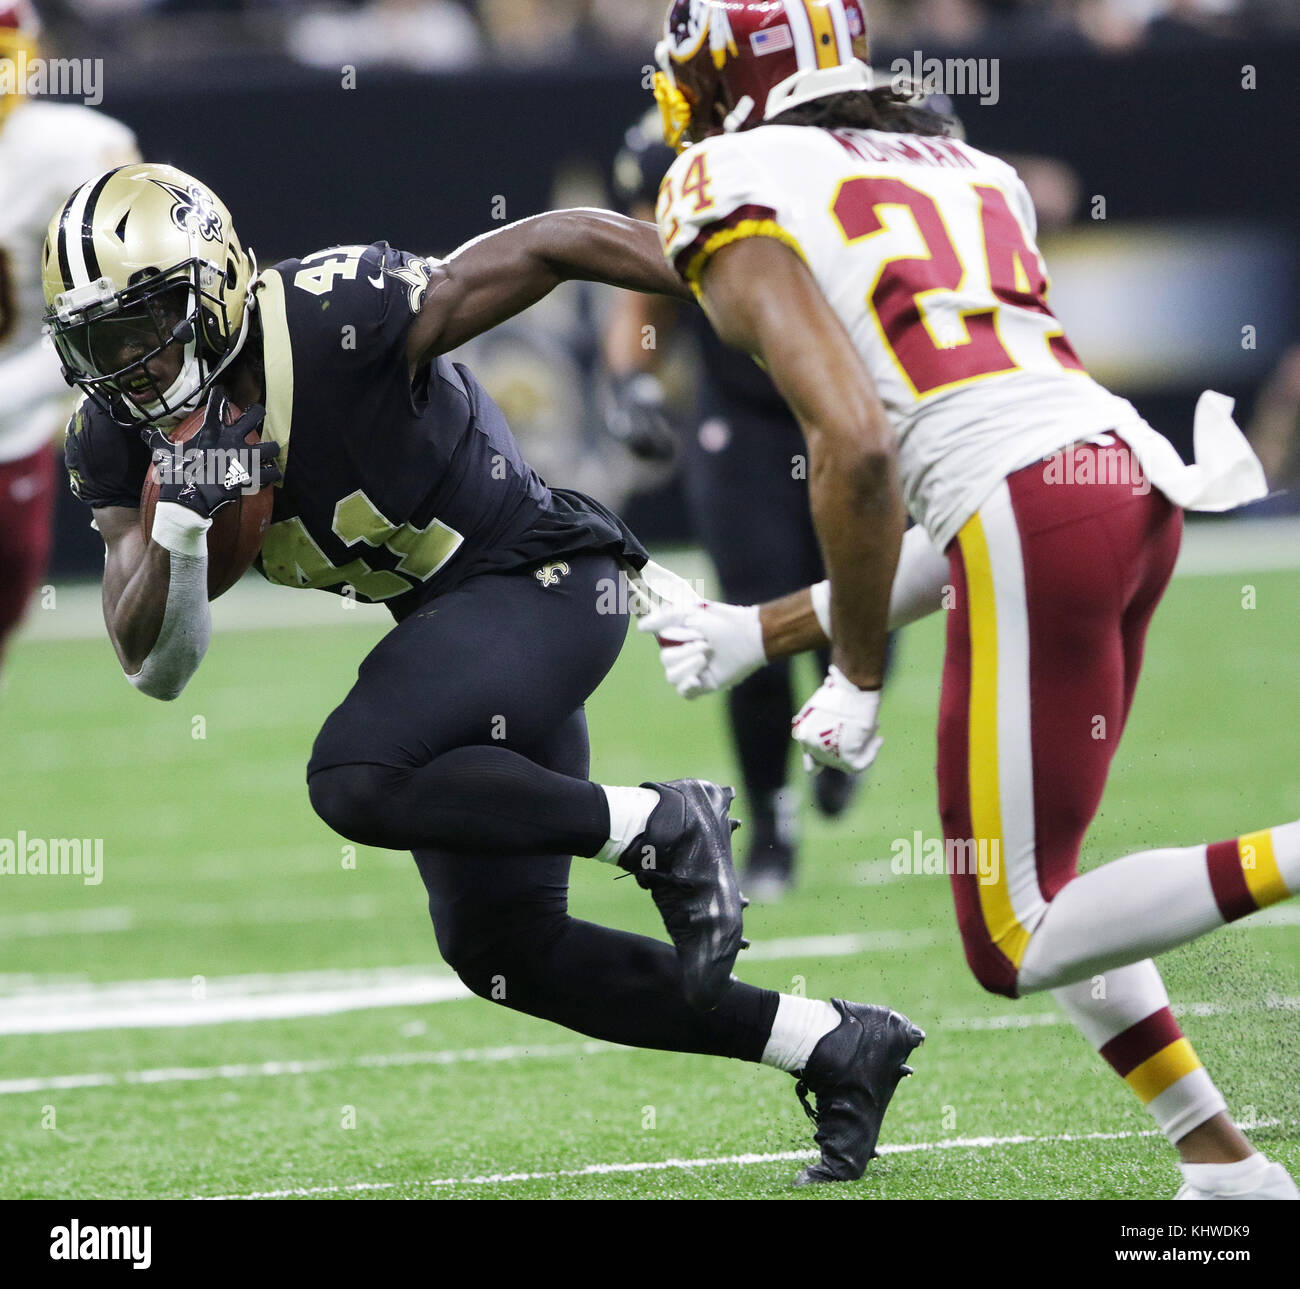 New Orleans, LOUISIANA, USA. 19th Nov, 2017. New Orleans Saints running back Alvin Kamara tries to get past Washington Redskins cornerback Josh Norman at the Mercedes-Benz Superdome in New Orleans, Louisiana USA on November 19, 2017. The Saints beat the Redskin 34-31 in overtime. Credit: Dan Anderson/ZUMA Wire/Alamy Live News Stock Photo